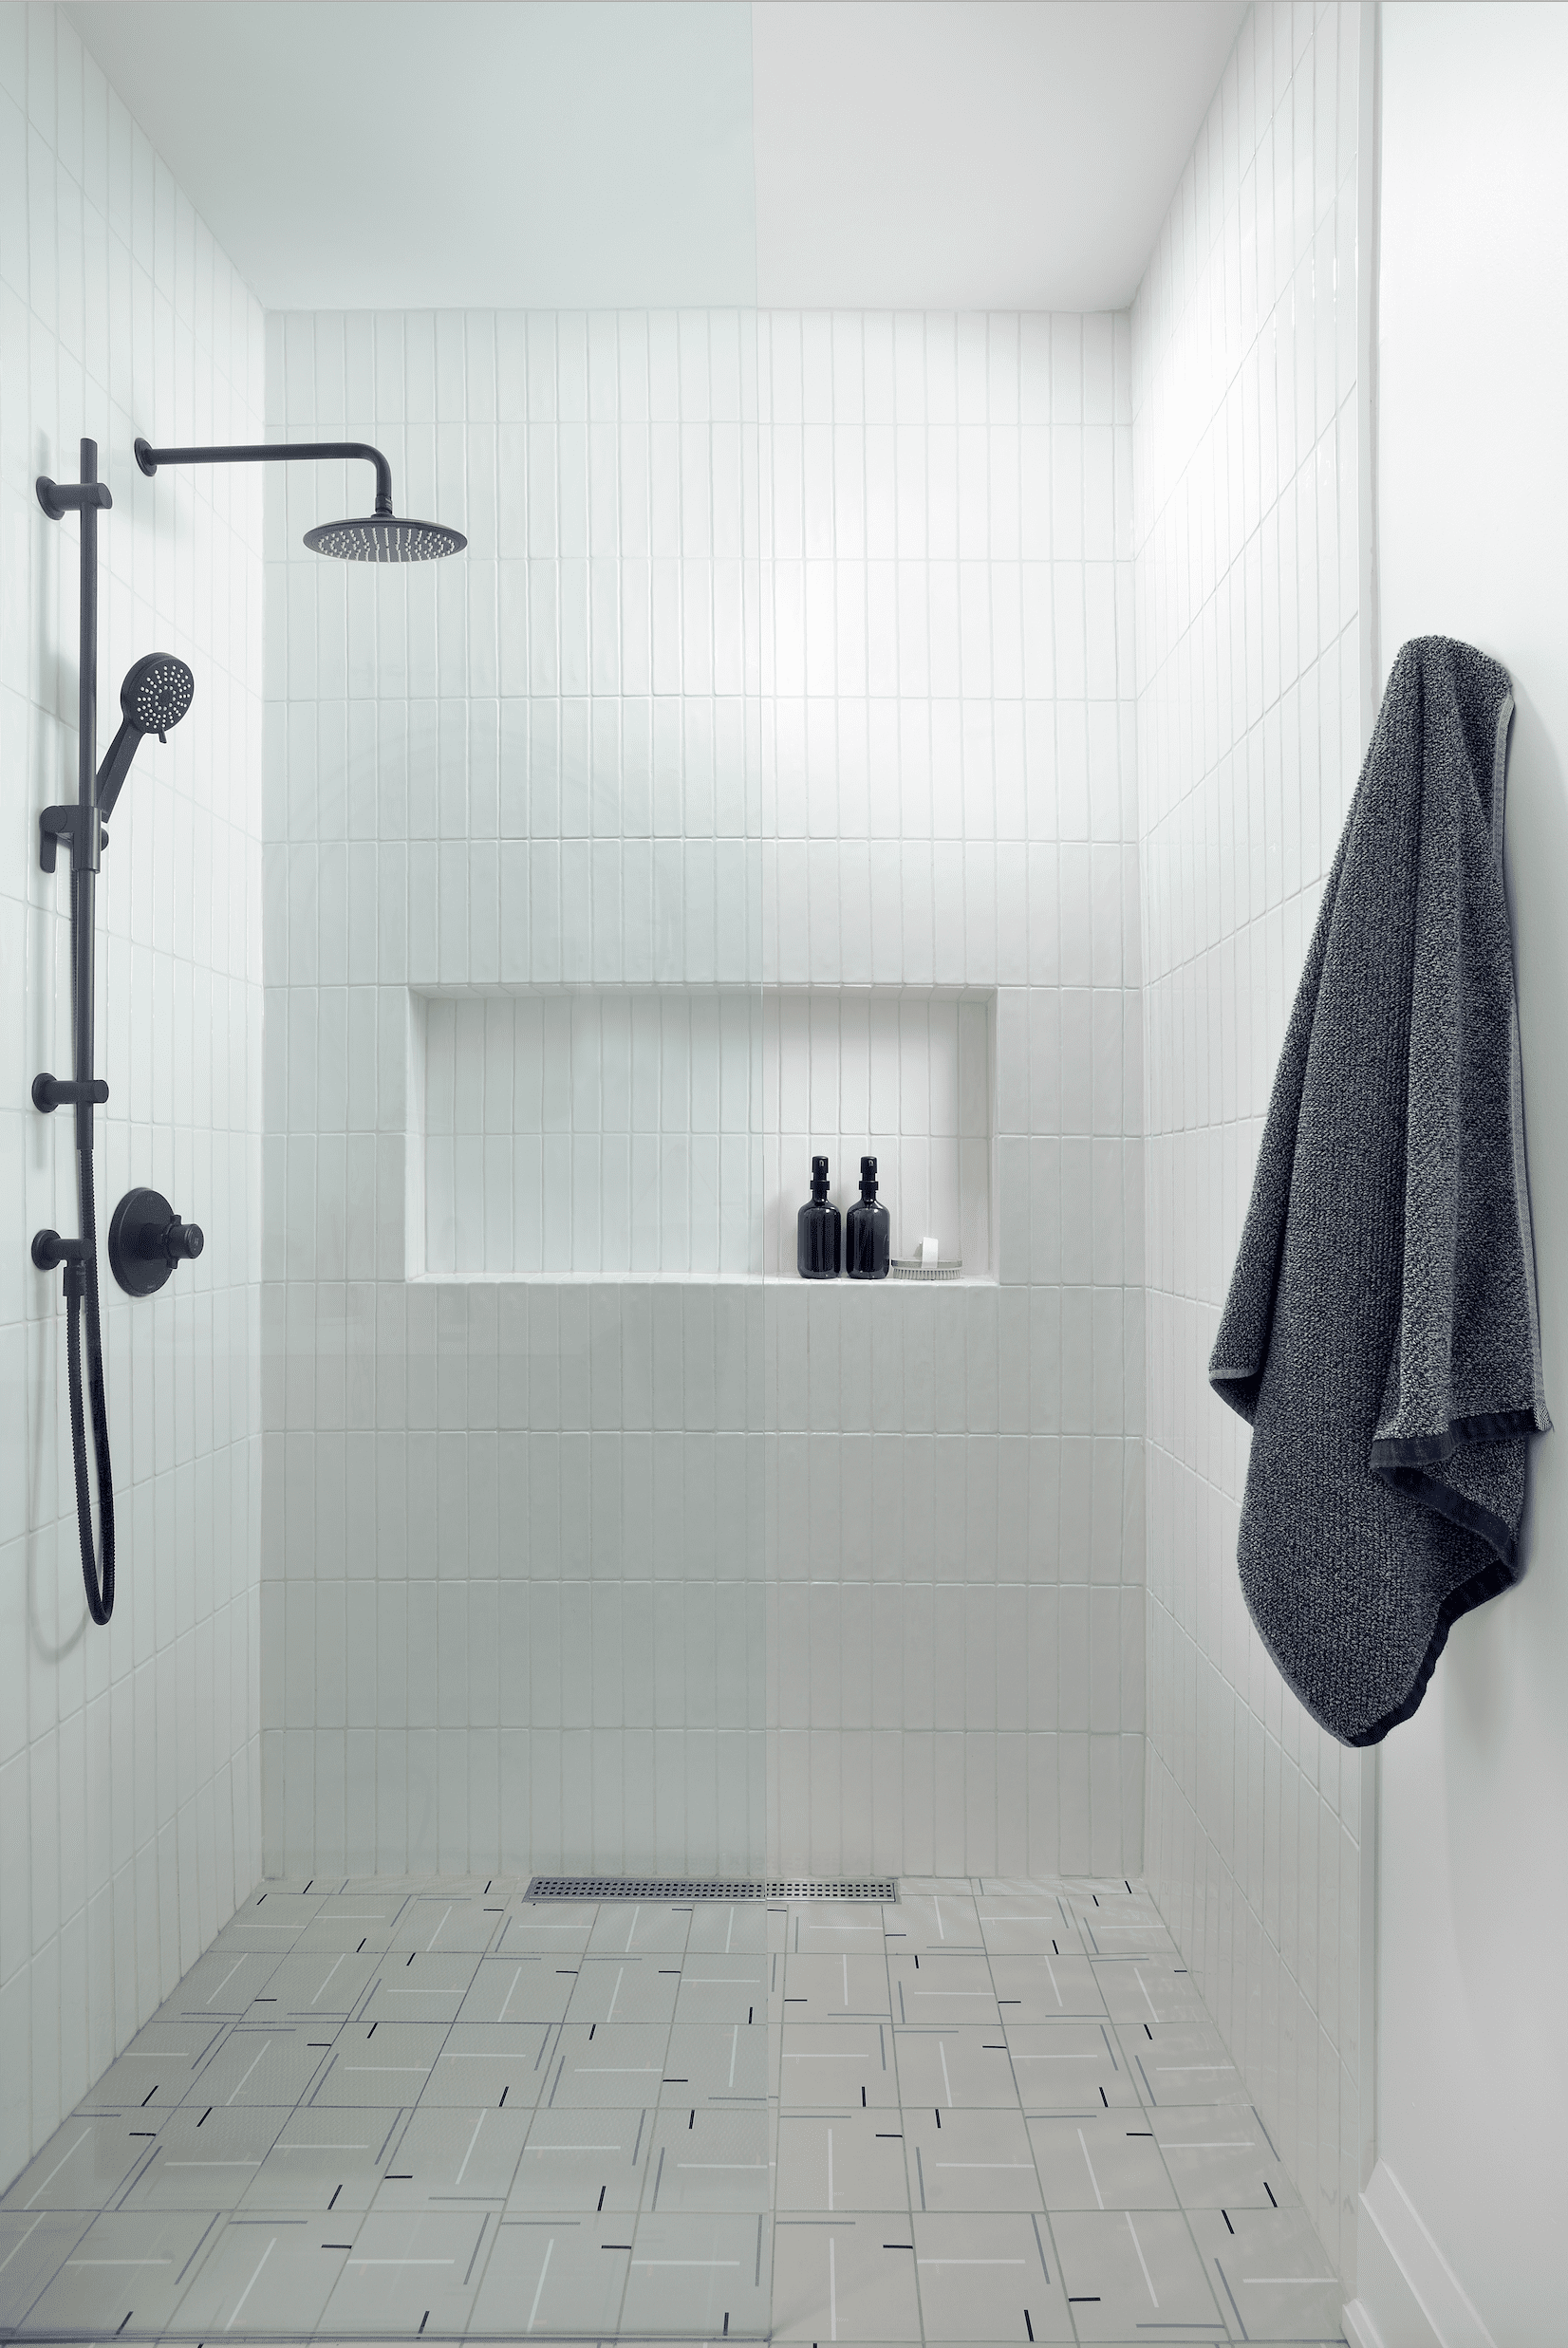 Use Aesthetic Shower Setup in Contemporary Style